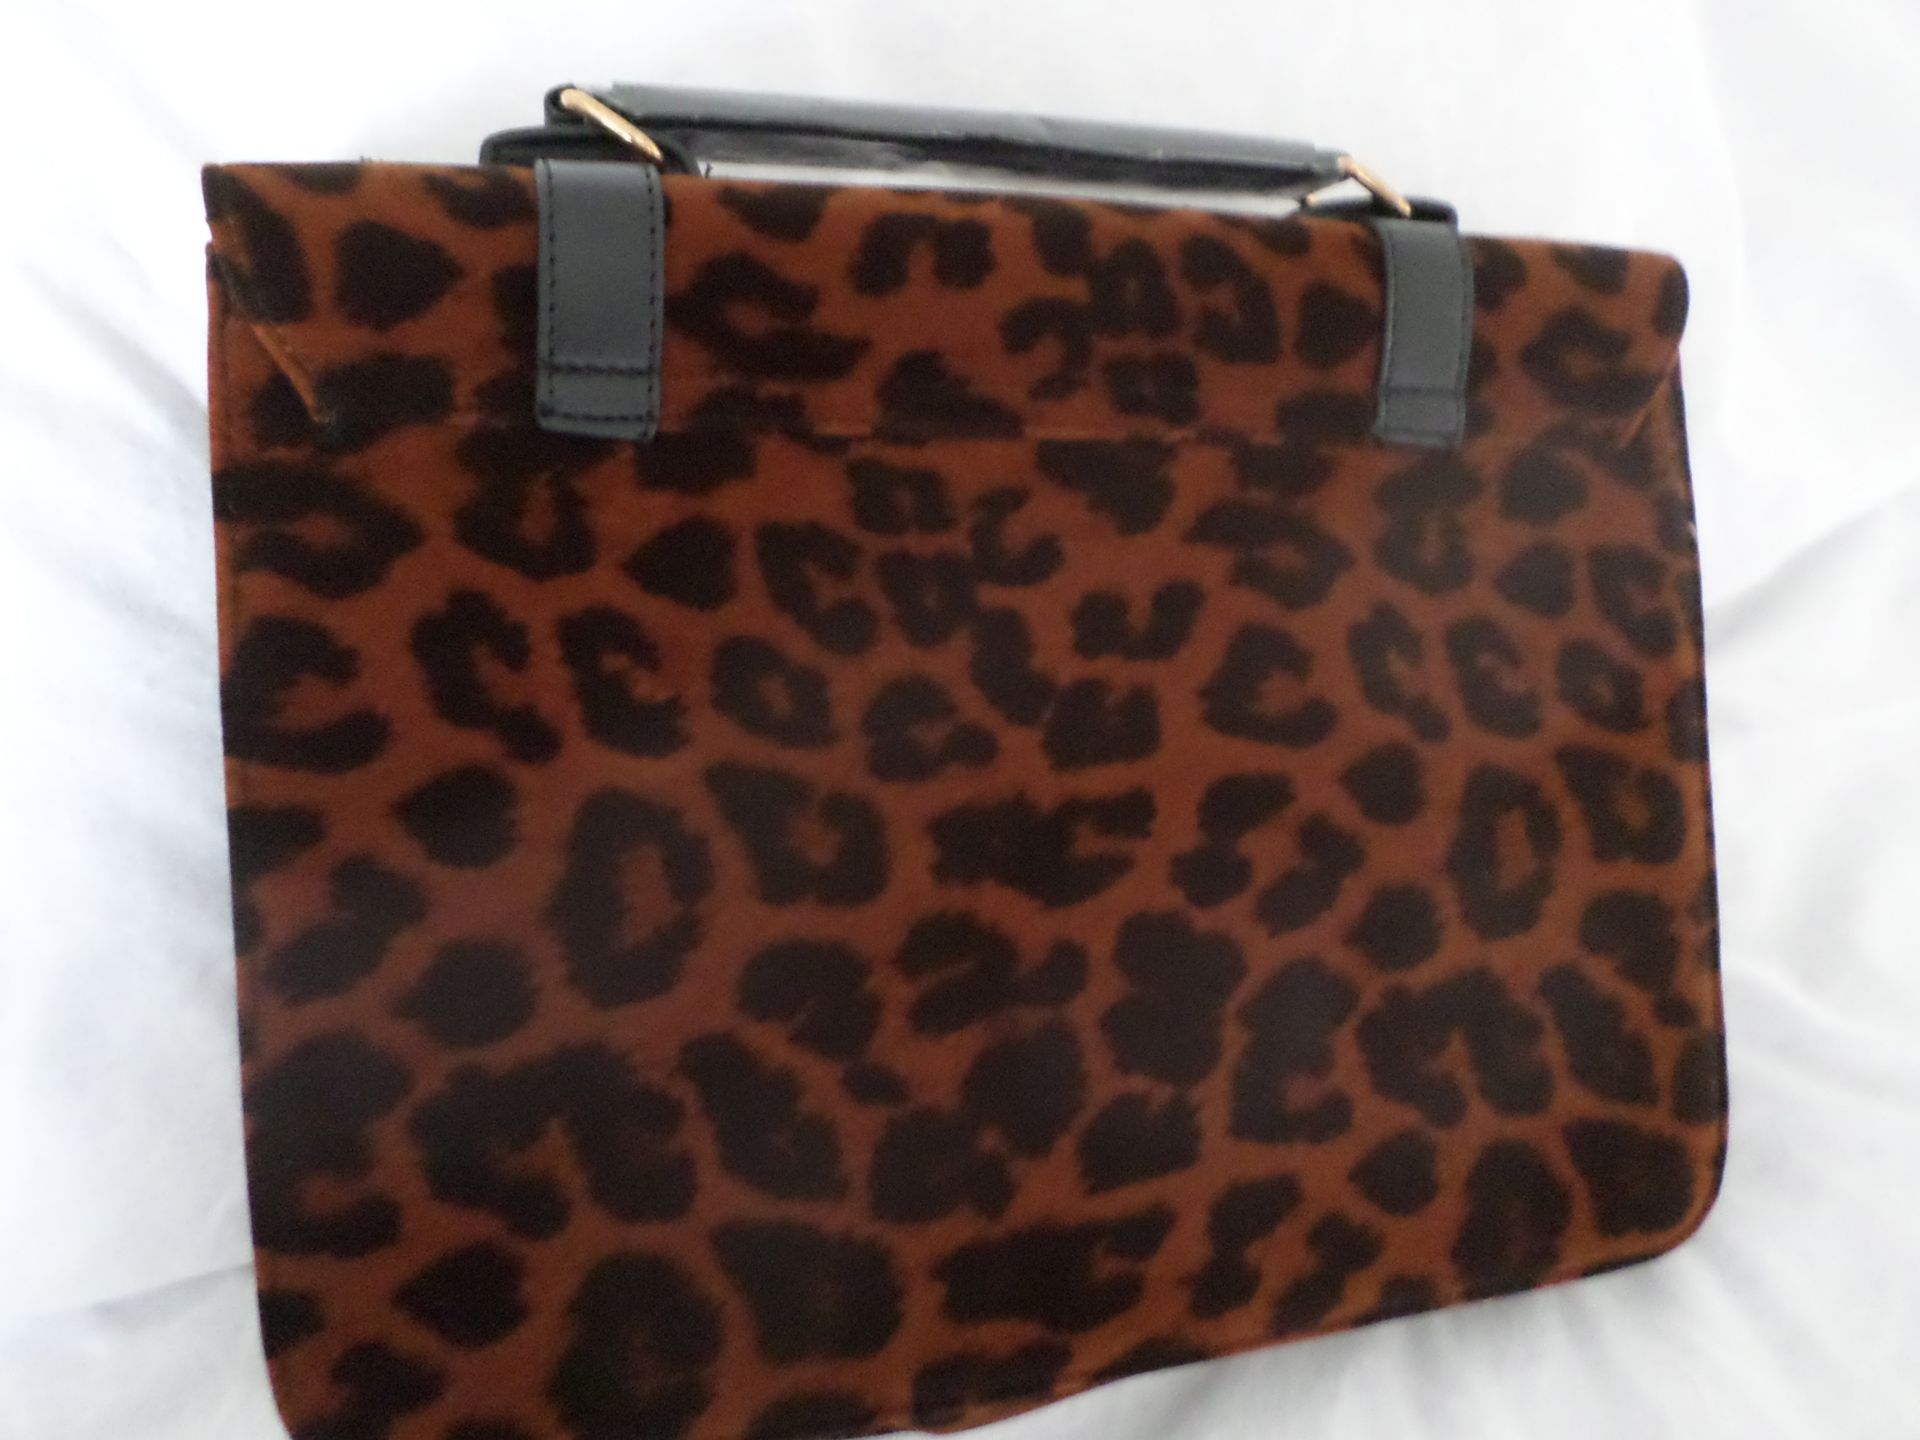 Brand New Ht London Large Satchel/Briefcase Leopard Print Rrp £29.99 - Image 4 of 5